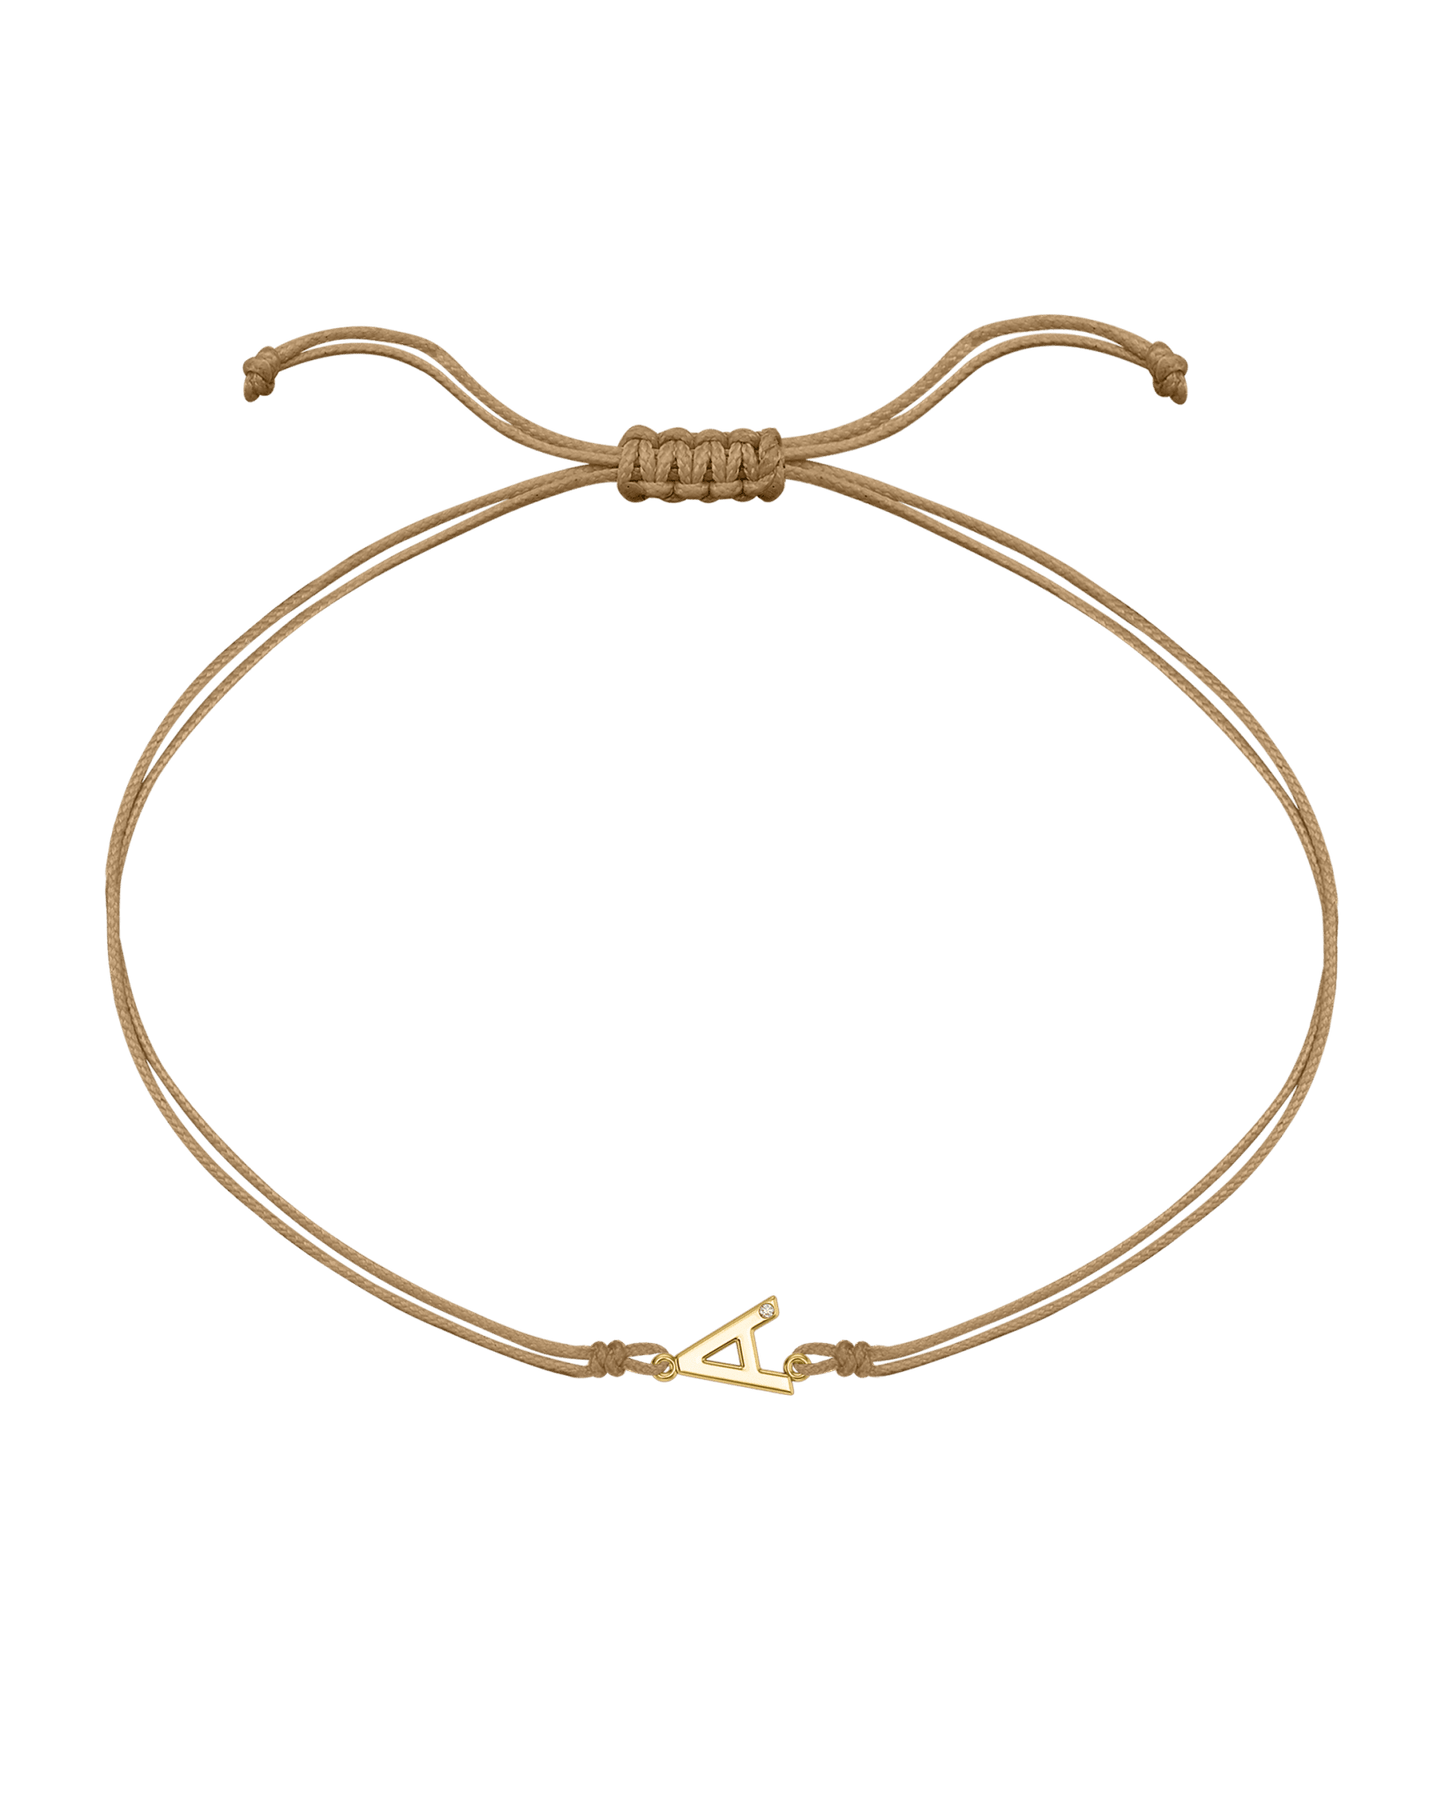 Initial String of Love - 14K Yellow Gold Bracelets 14K Solid Gold Camel 